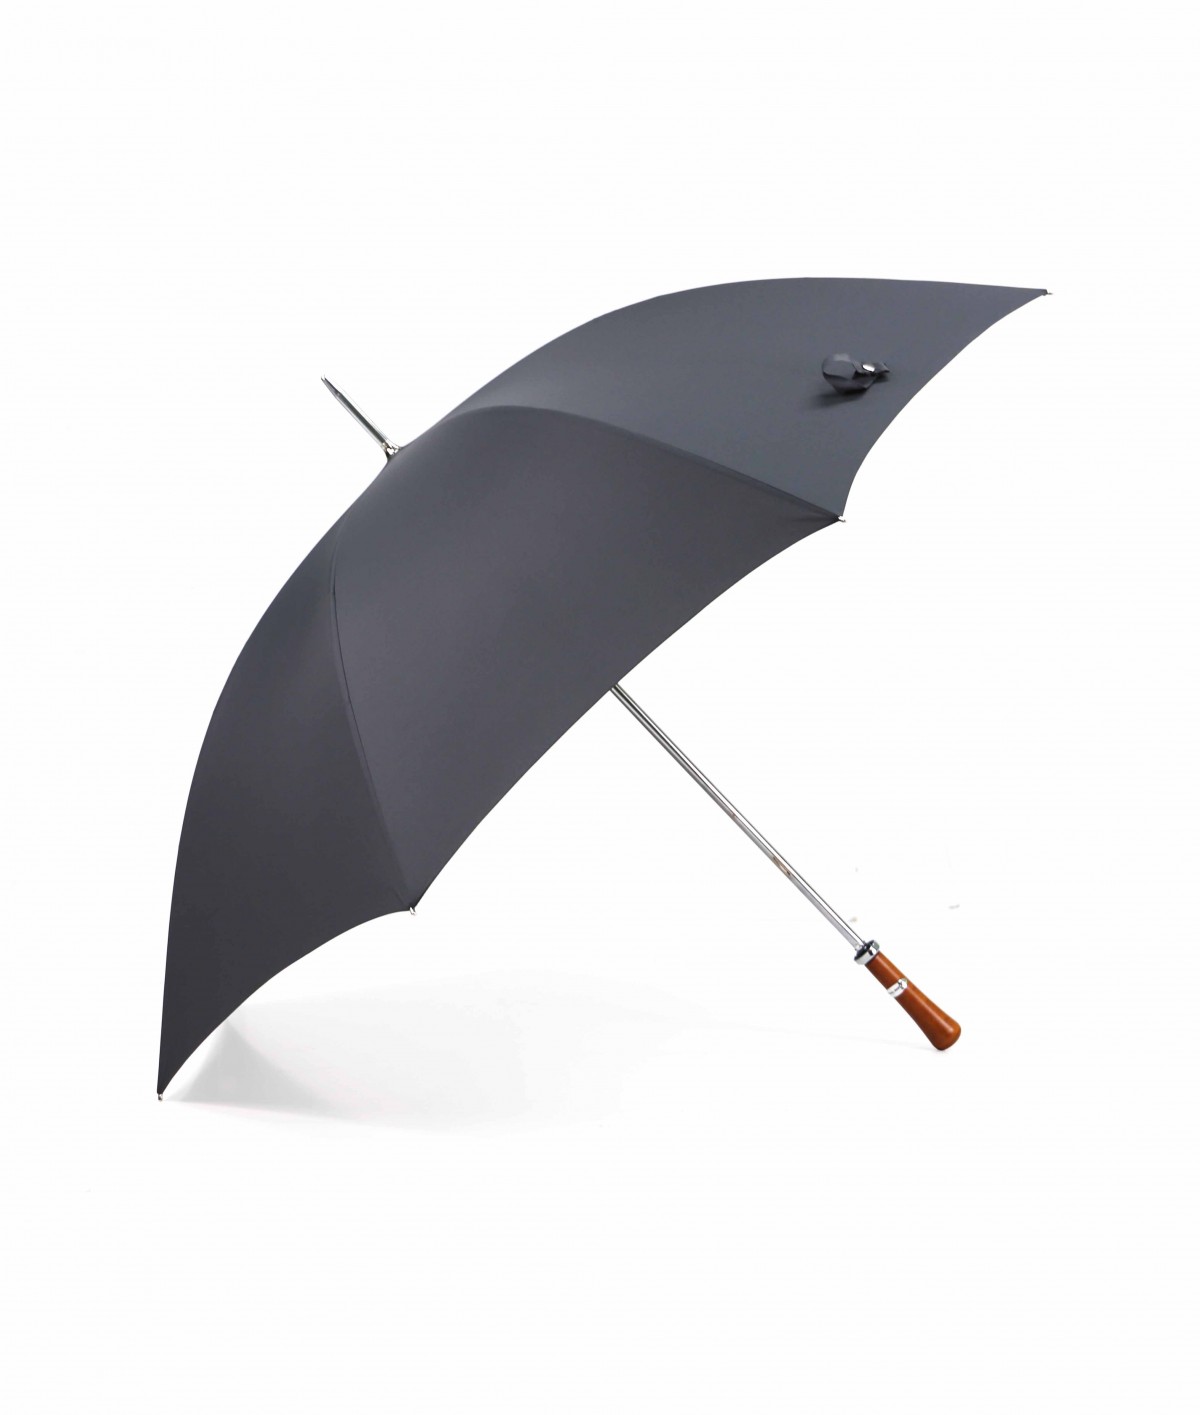 → "The Golf" Umbrella - Manual - Rifle - Made in France by the French Umbrella Manufacturer Maison Pierre Vaux